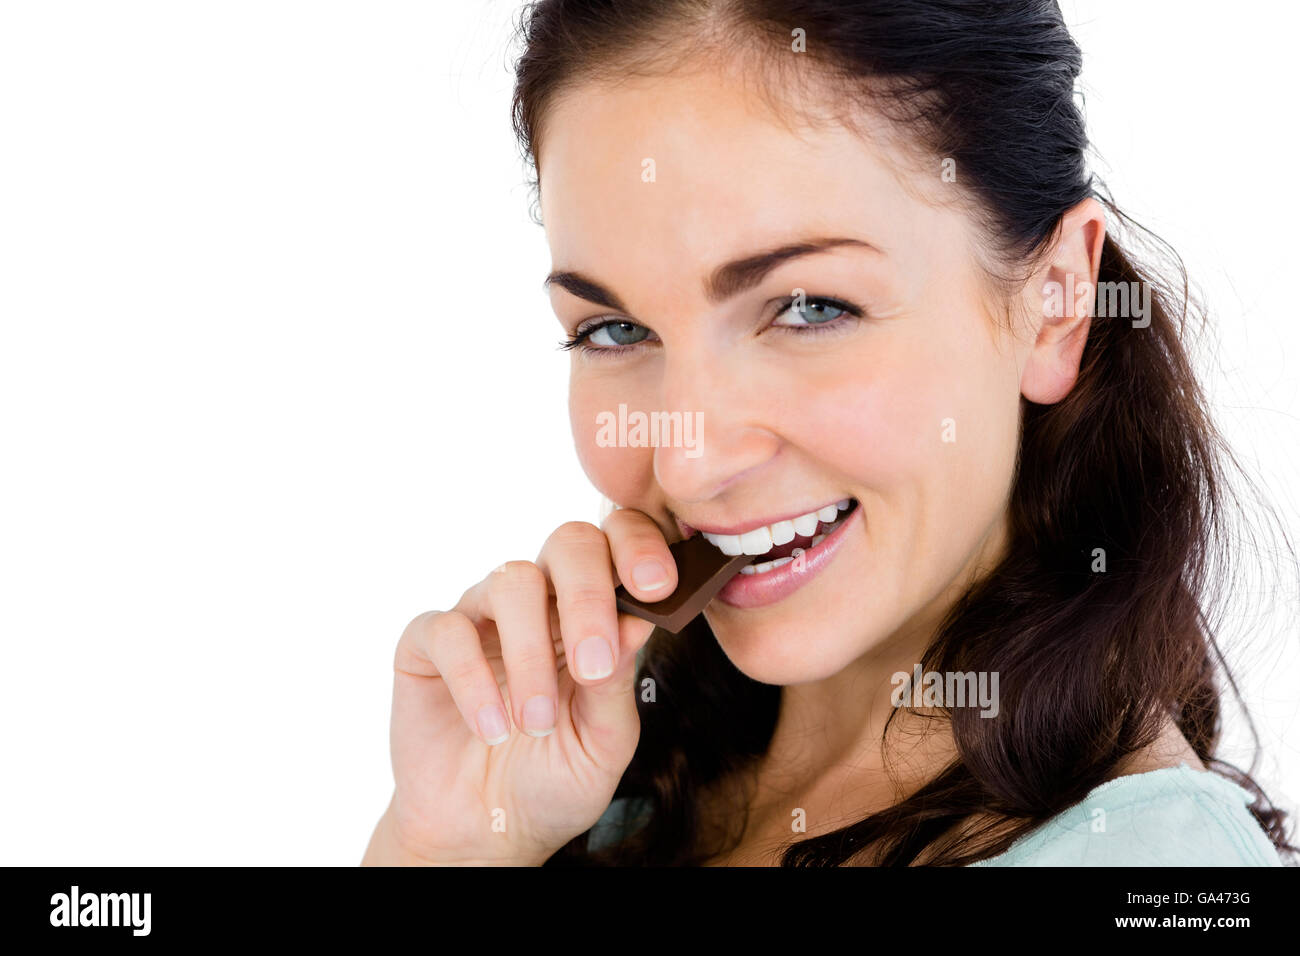 Close-up portrait of smiling woman eating chocolate bar Banque D'Images